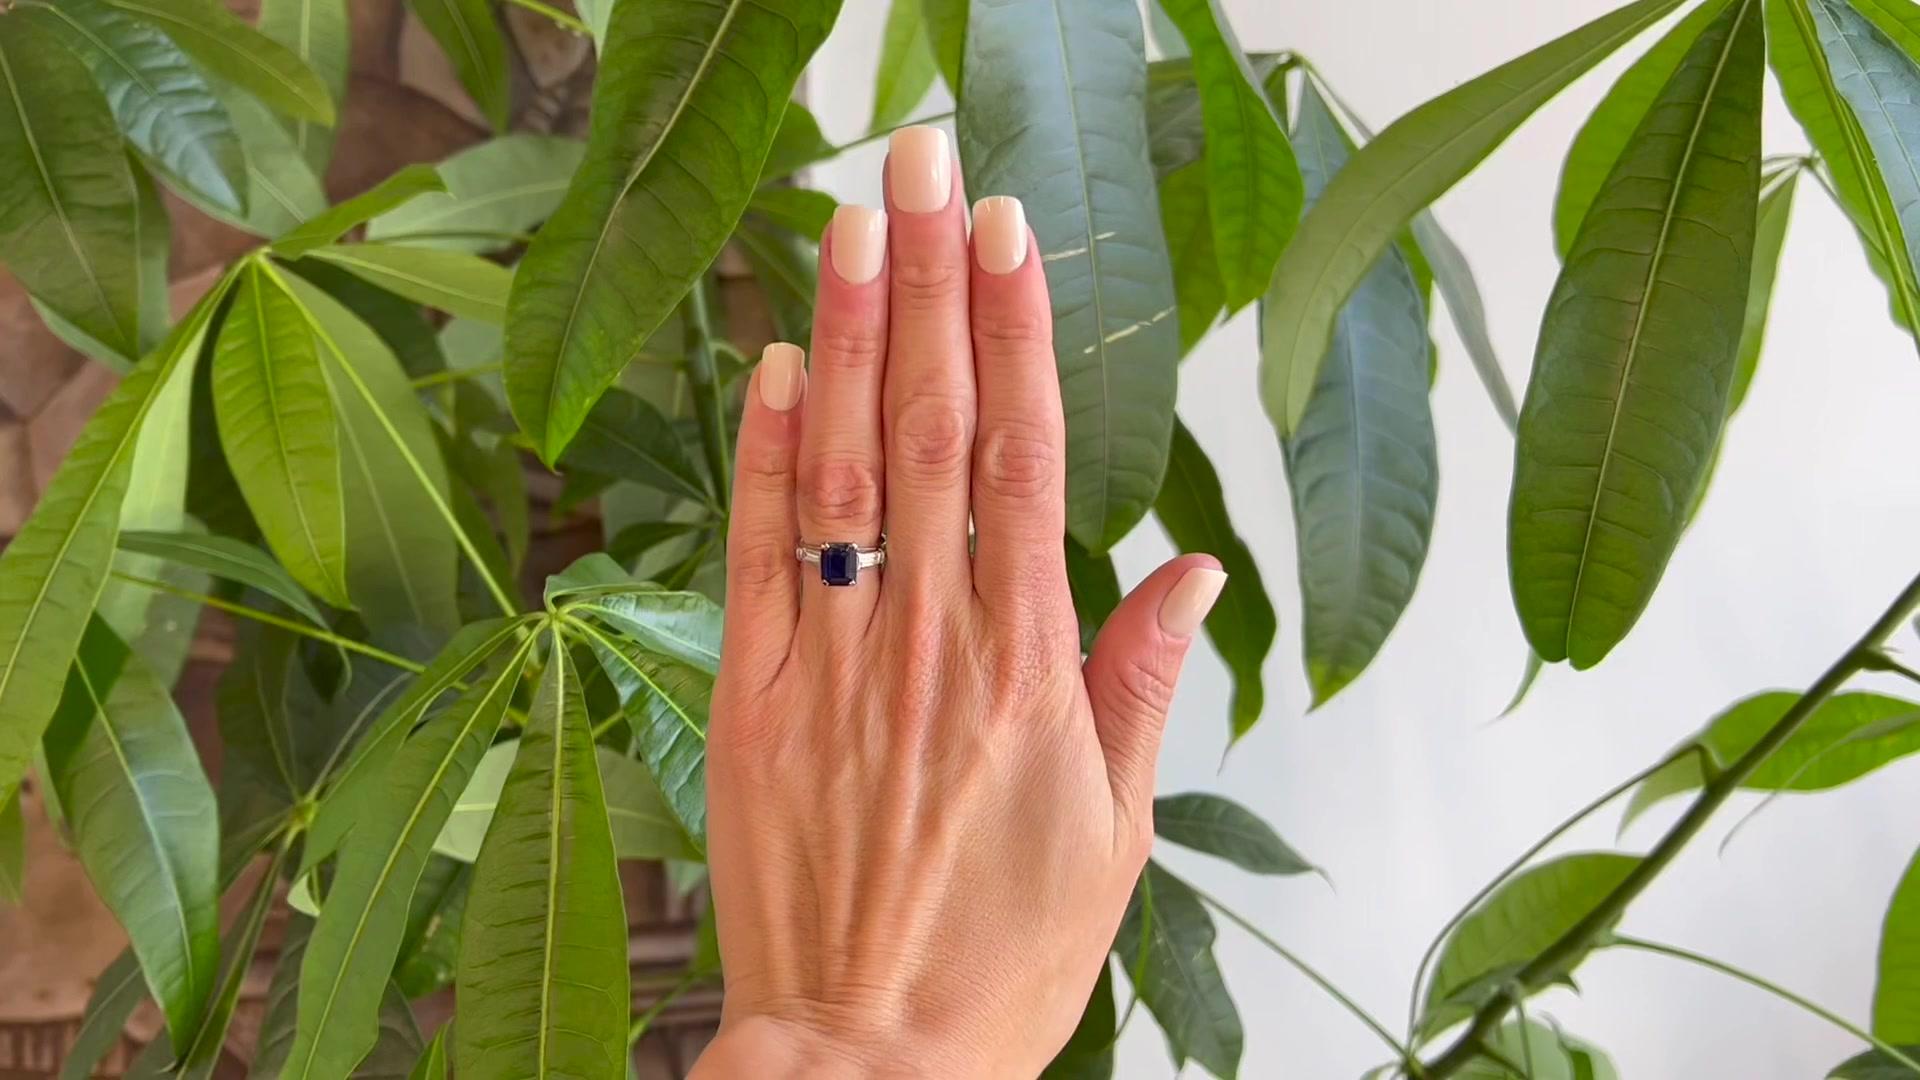 One Mid Century GIA 2.56 Carats Sri Lanka Sapphire Diamond Platinum Ring. Featuring one GIA octagonal step cut dark blue sapphire of 2.56 carats, accompanied with GIA #5222632747 stating the sapphire is of Sri Lanka origin. Accented by two baguette